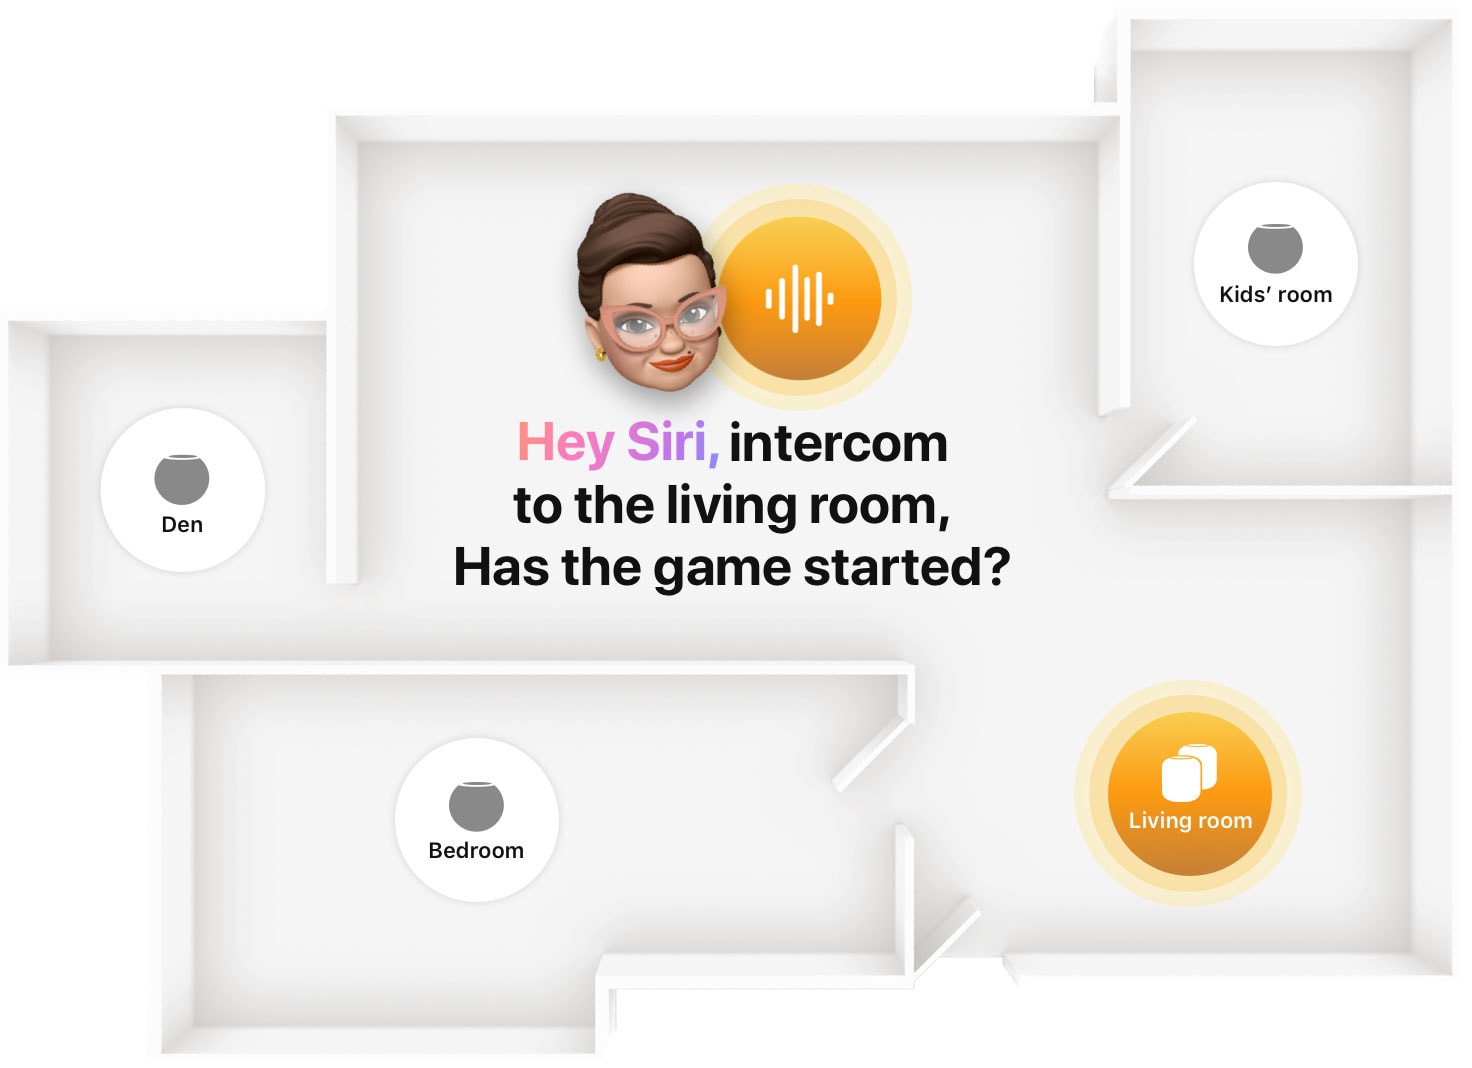 How to use Intercom: Intercom lets you broadcast voice messages to HomePod and other Apple devices.